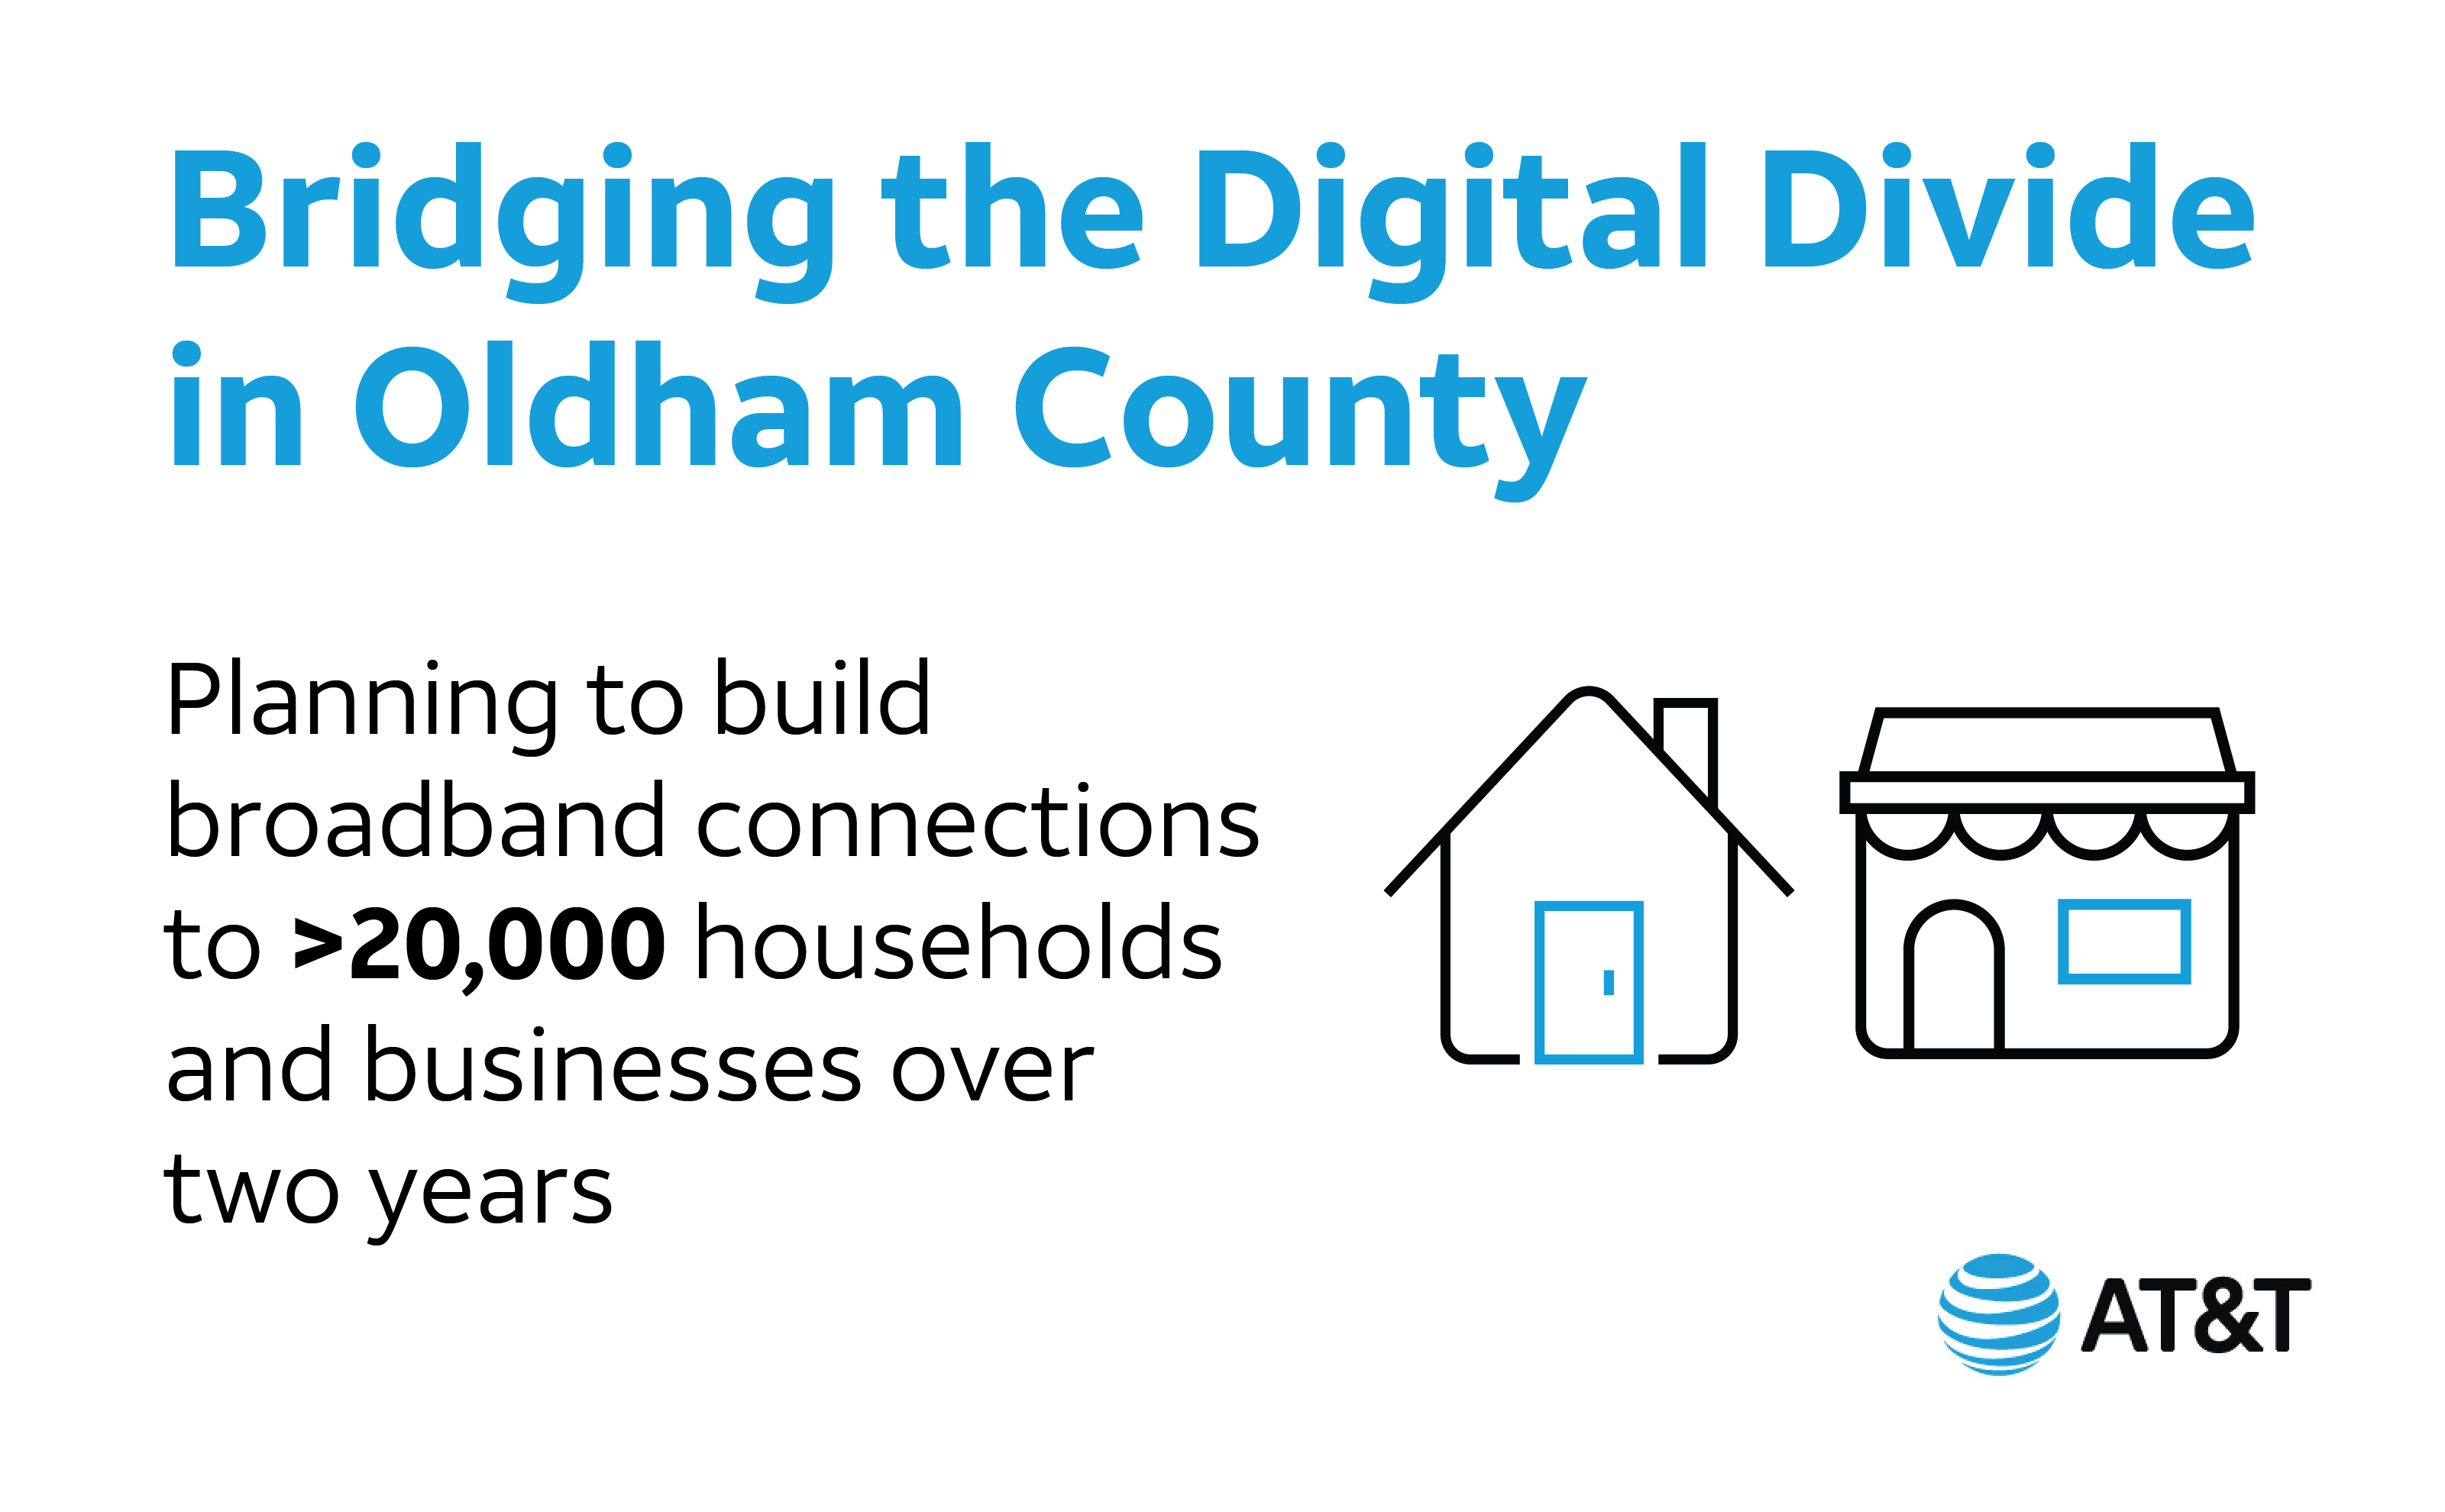 An infographic with plans to bridge the Digital Divide in Oldham County.